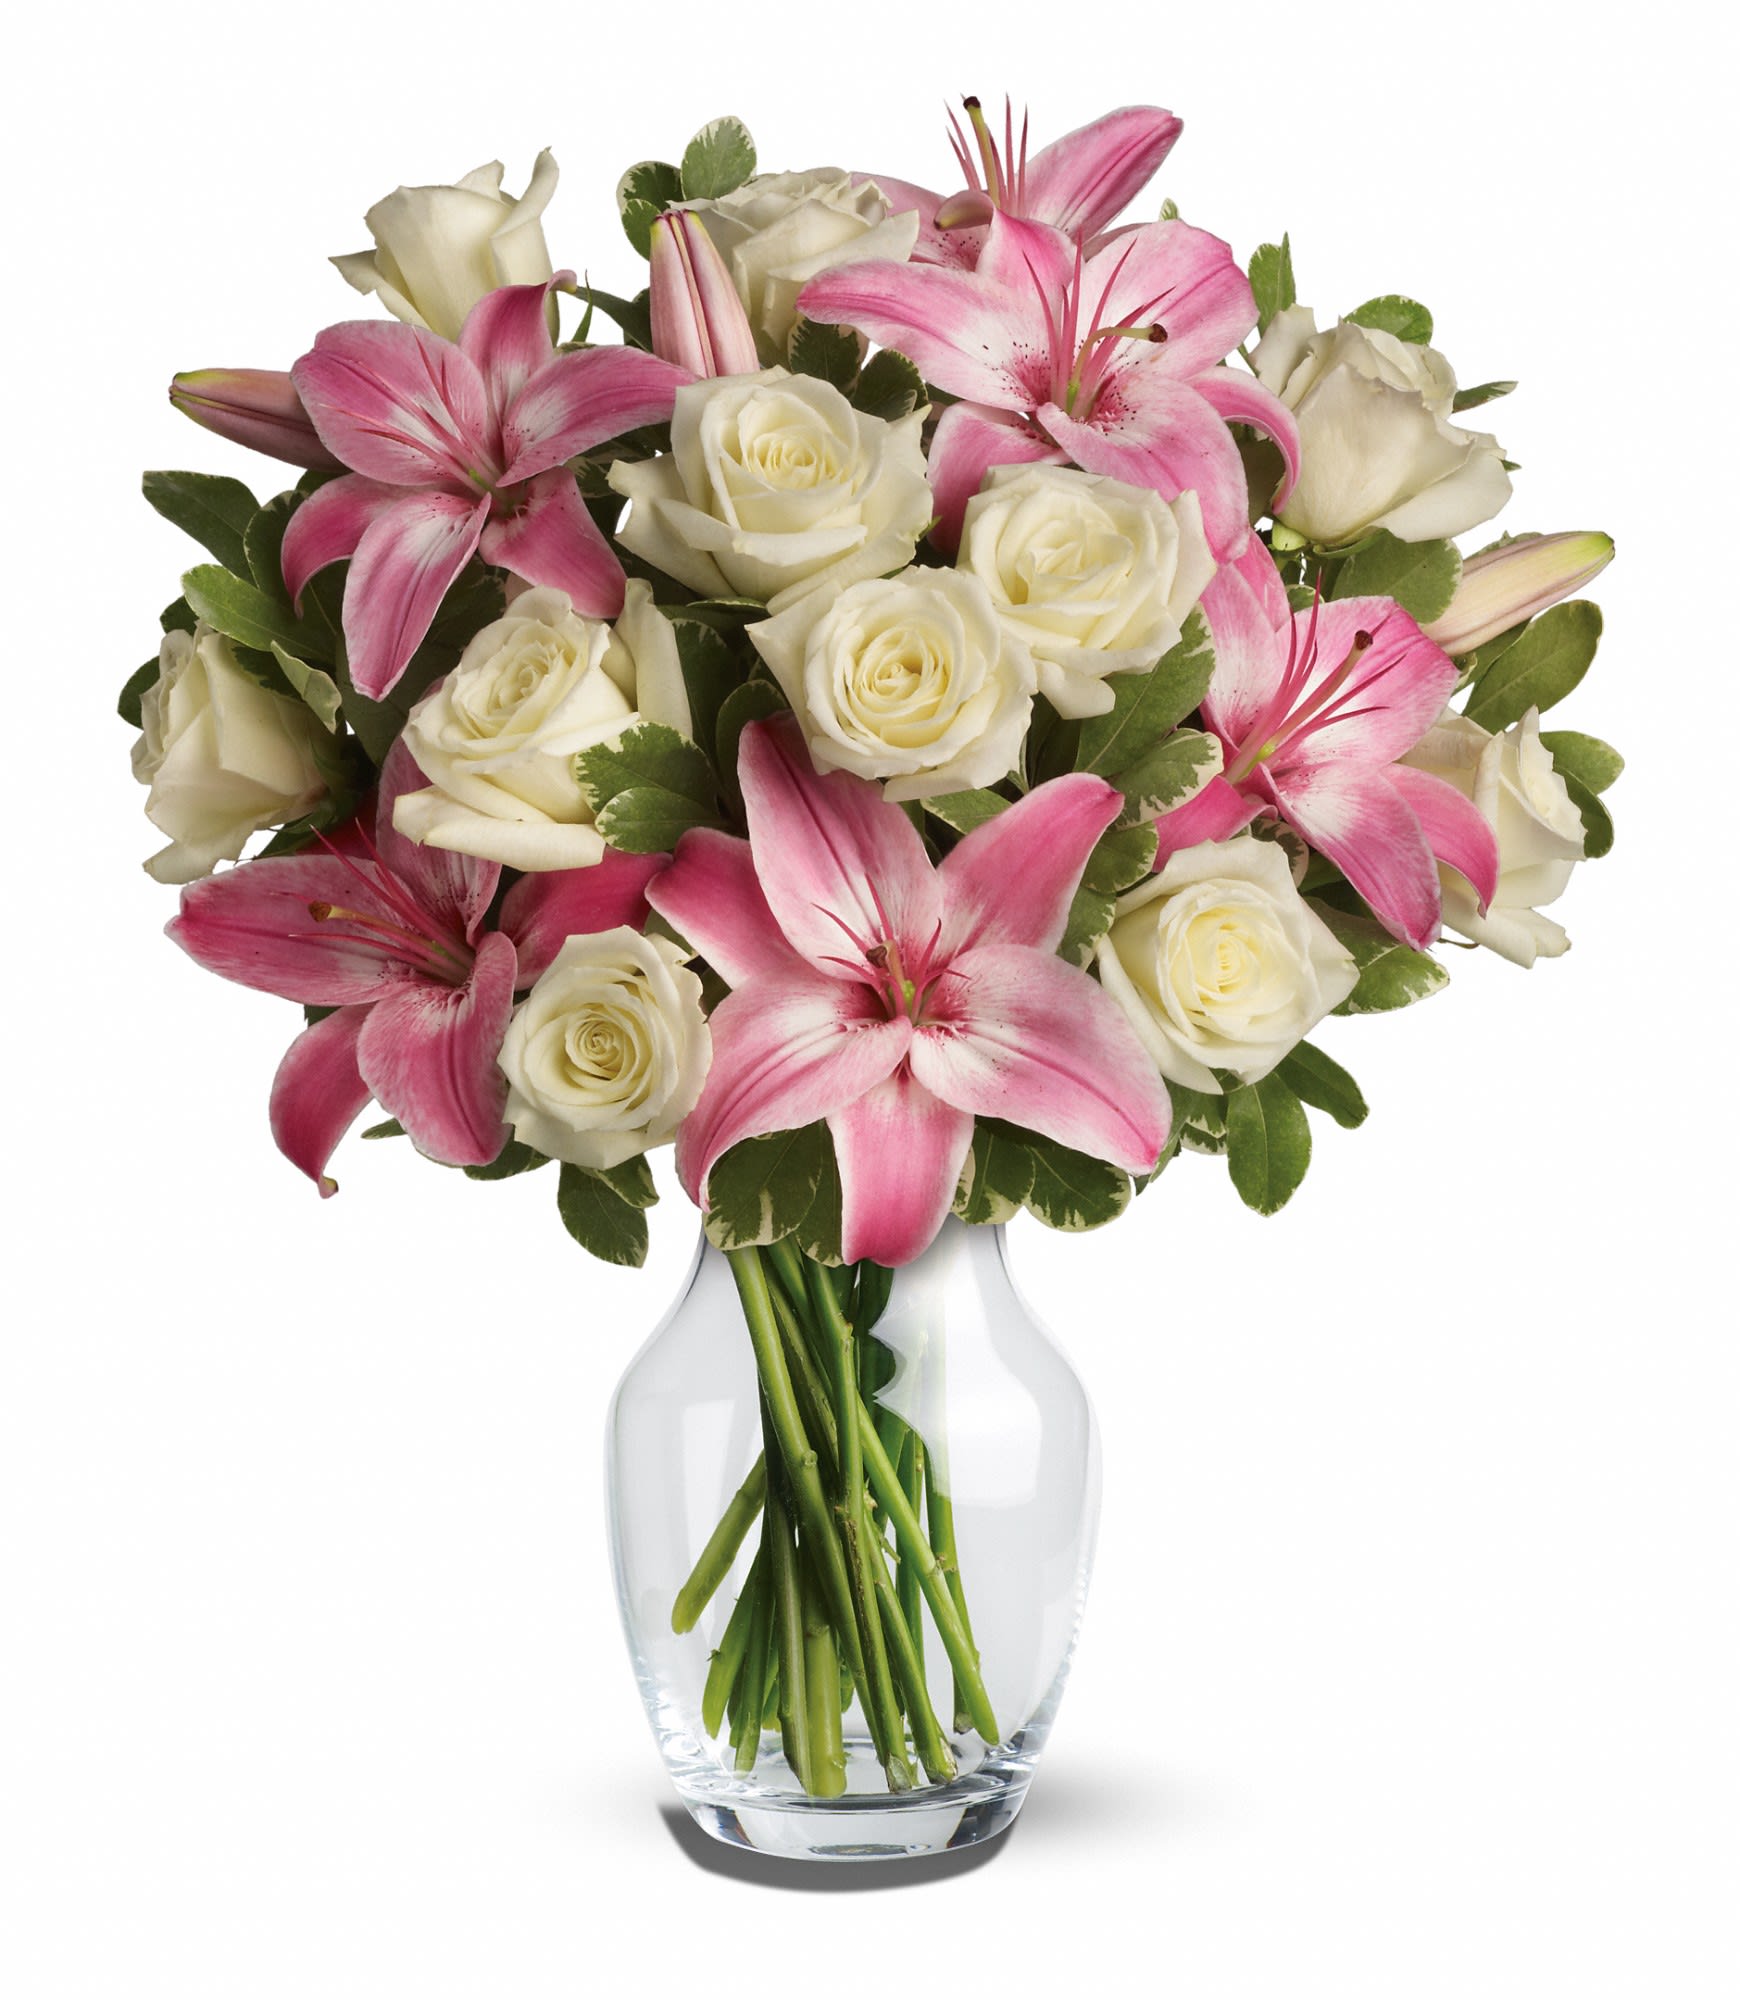 Always a Lady  - A romantic gift like this one is always appreciated. An eye-catching display of roses and lilies is perfectly arranged in a feminine vase which makes a beautiful and lasting impression.  Elegant white roses and sweet pink asiatic lilies are hand-arranged with greens. It's the perfect way to show you love her always and forever.  Approximately 15 1/2&quot; W x 18&quot; H  Orientation: All-Around      As Shown : T8-1A     Deluxe : T8-1B     Premium : T8-1C  